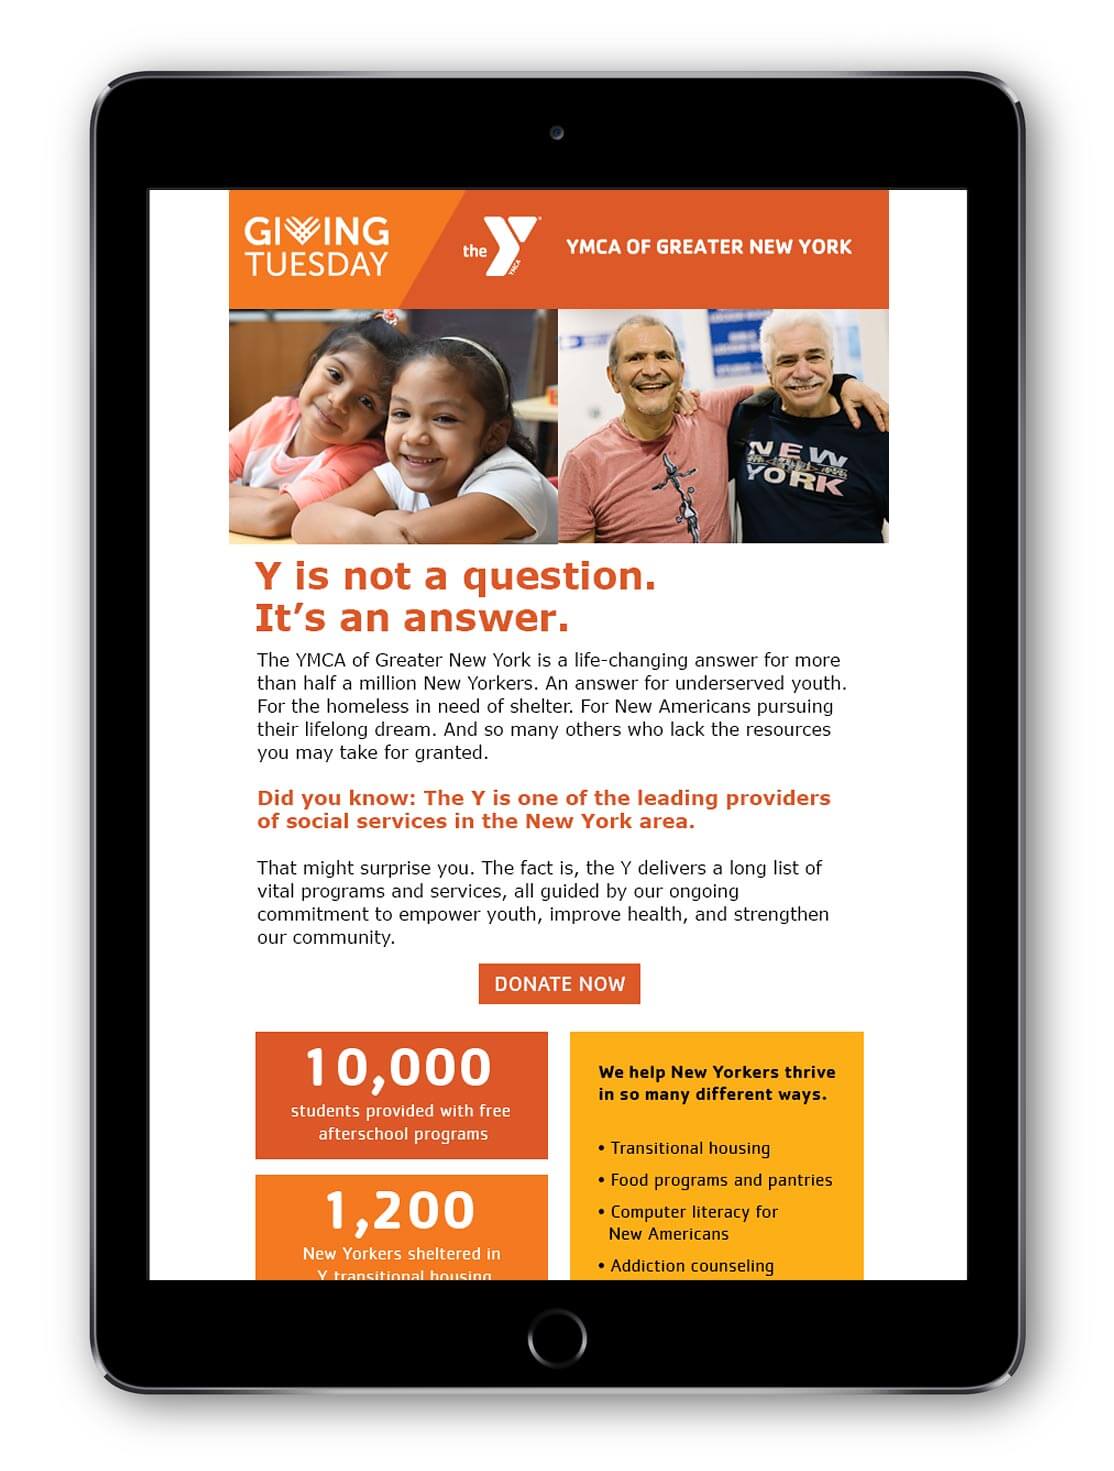 YMCA. Y is not a question. It's an answer.